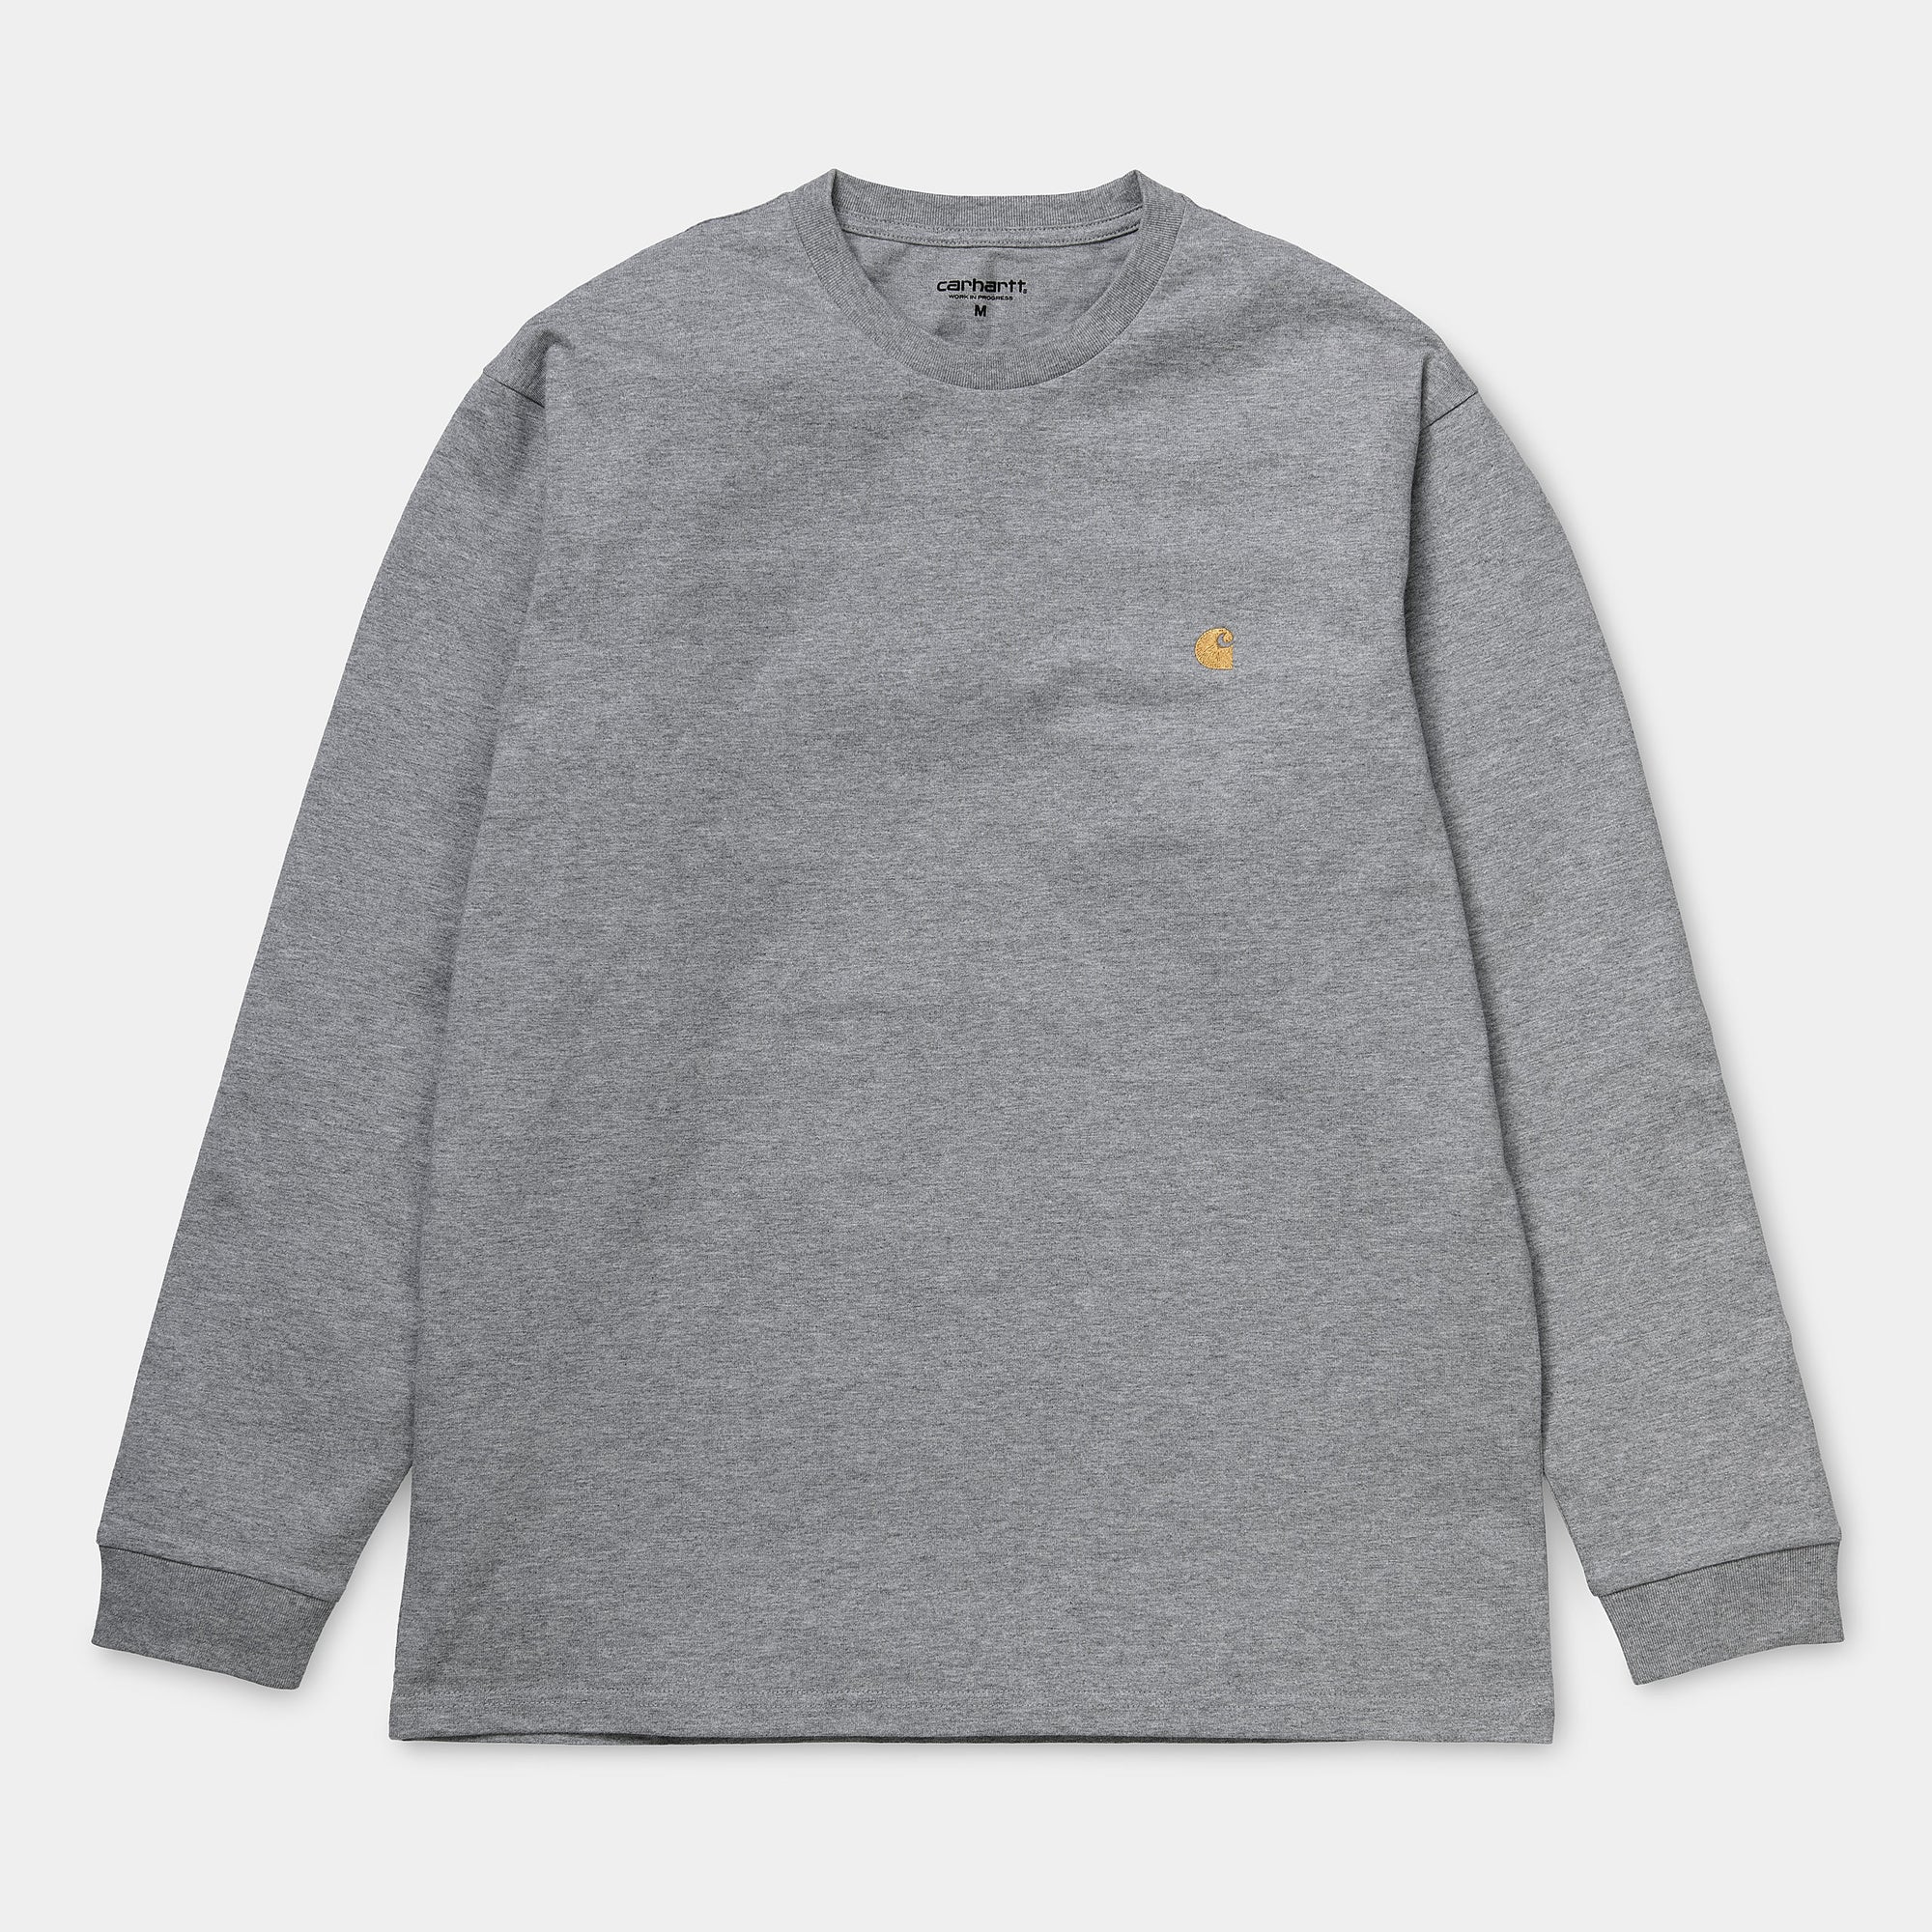 Carhartt WIP LS Chase T-Shirt Grey Heather / Gold